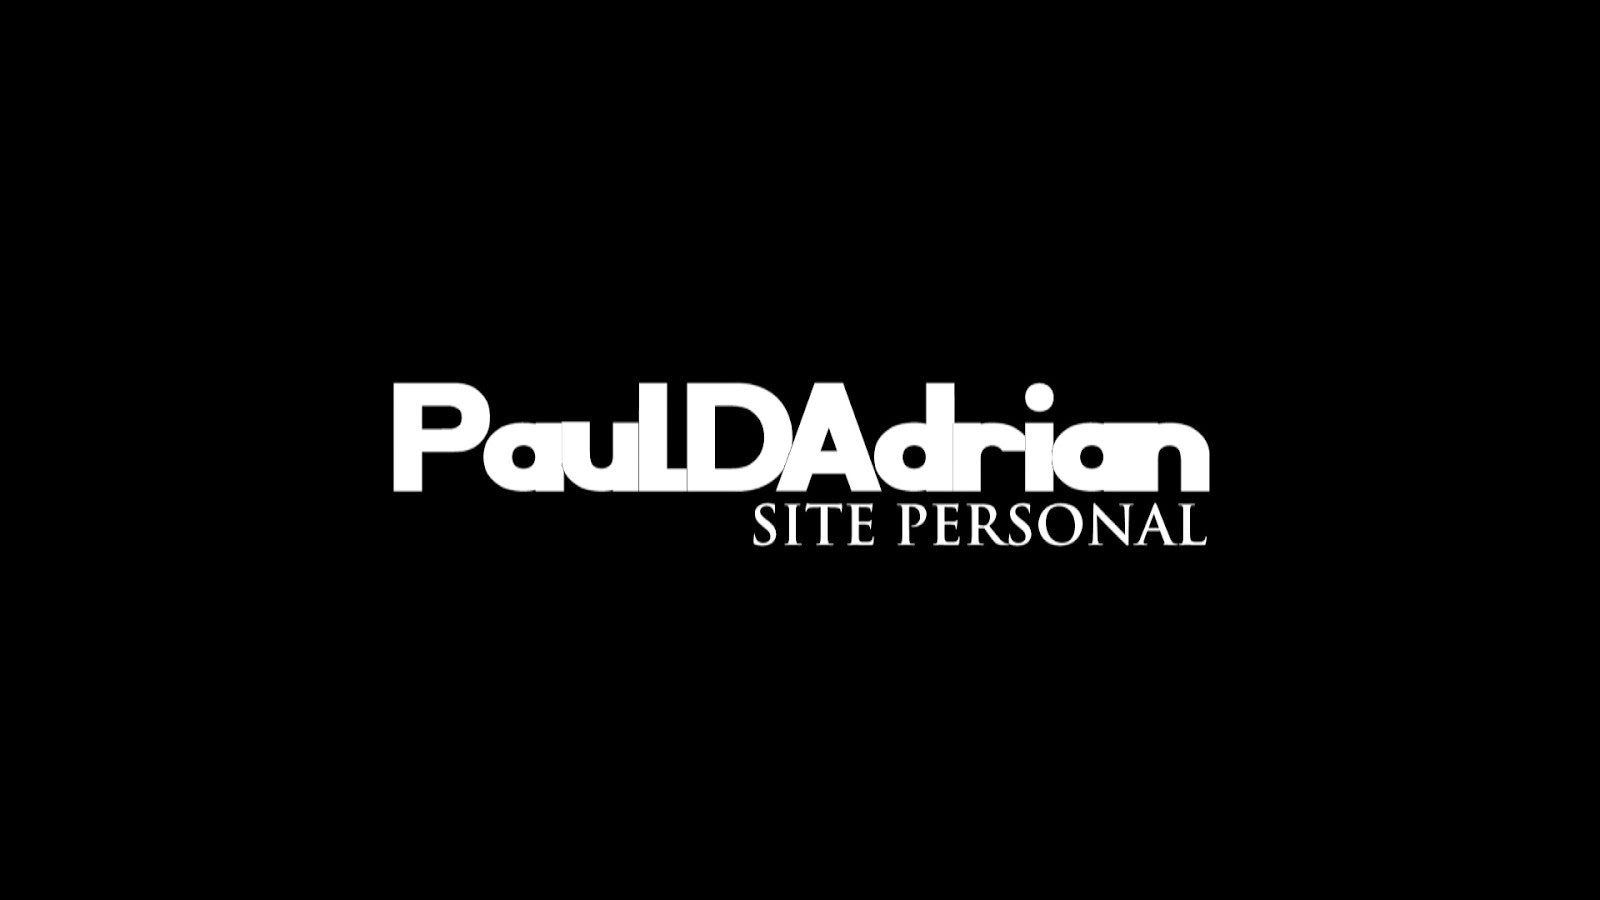 SITE PERSONAL